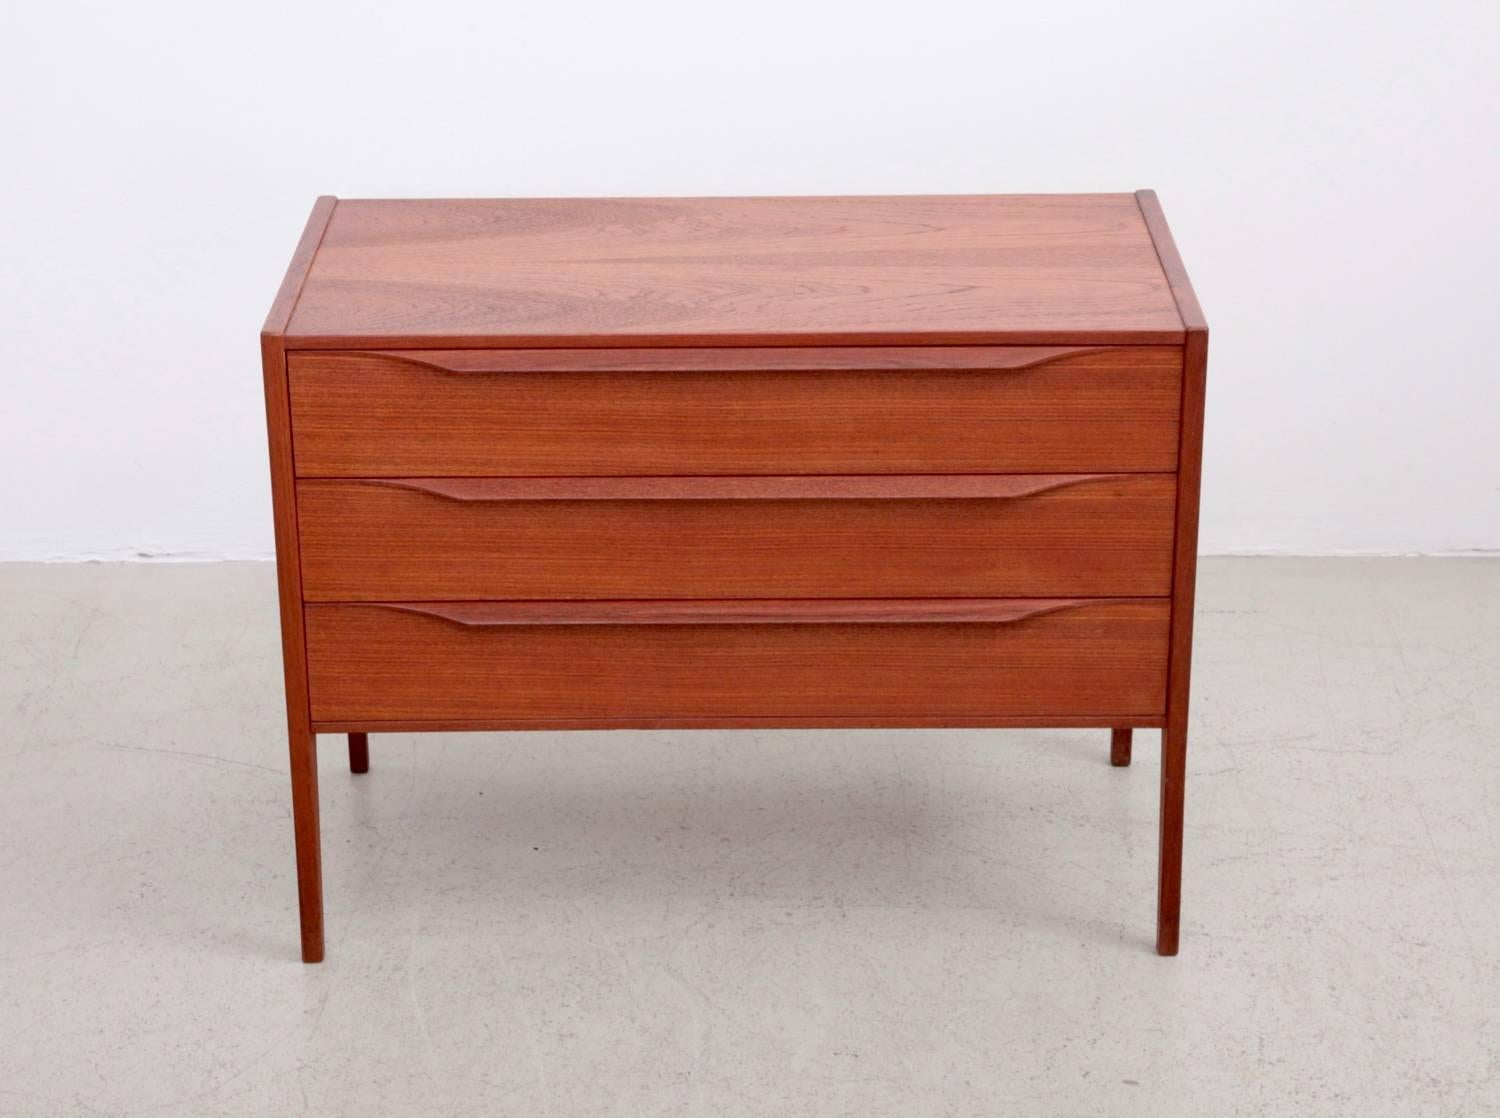 Well made Danish teak chest of drawers by Aksel Kjersgaard for Odder in excellent condition.